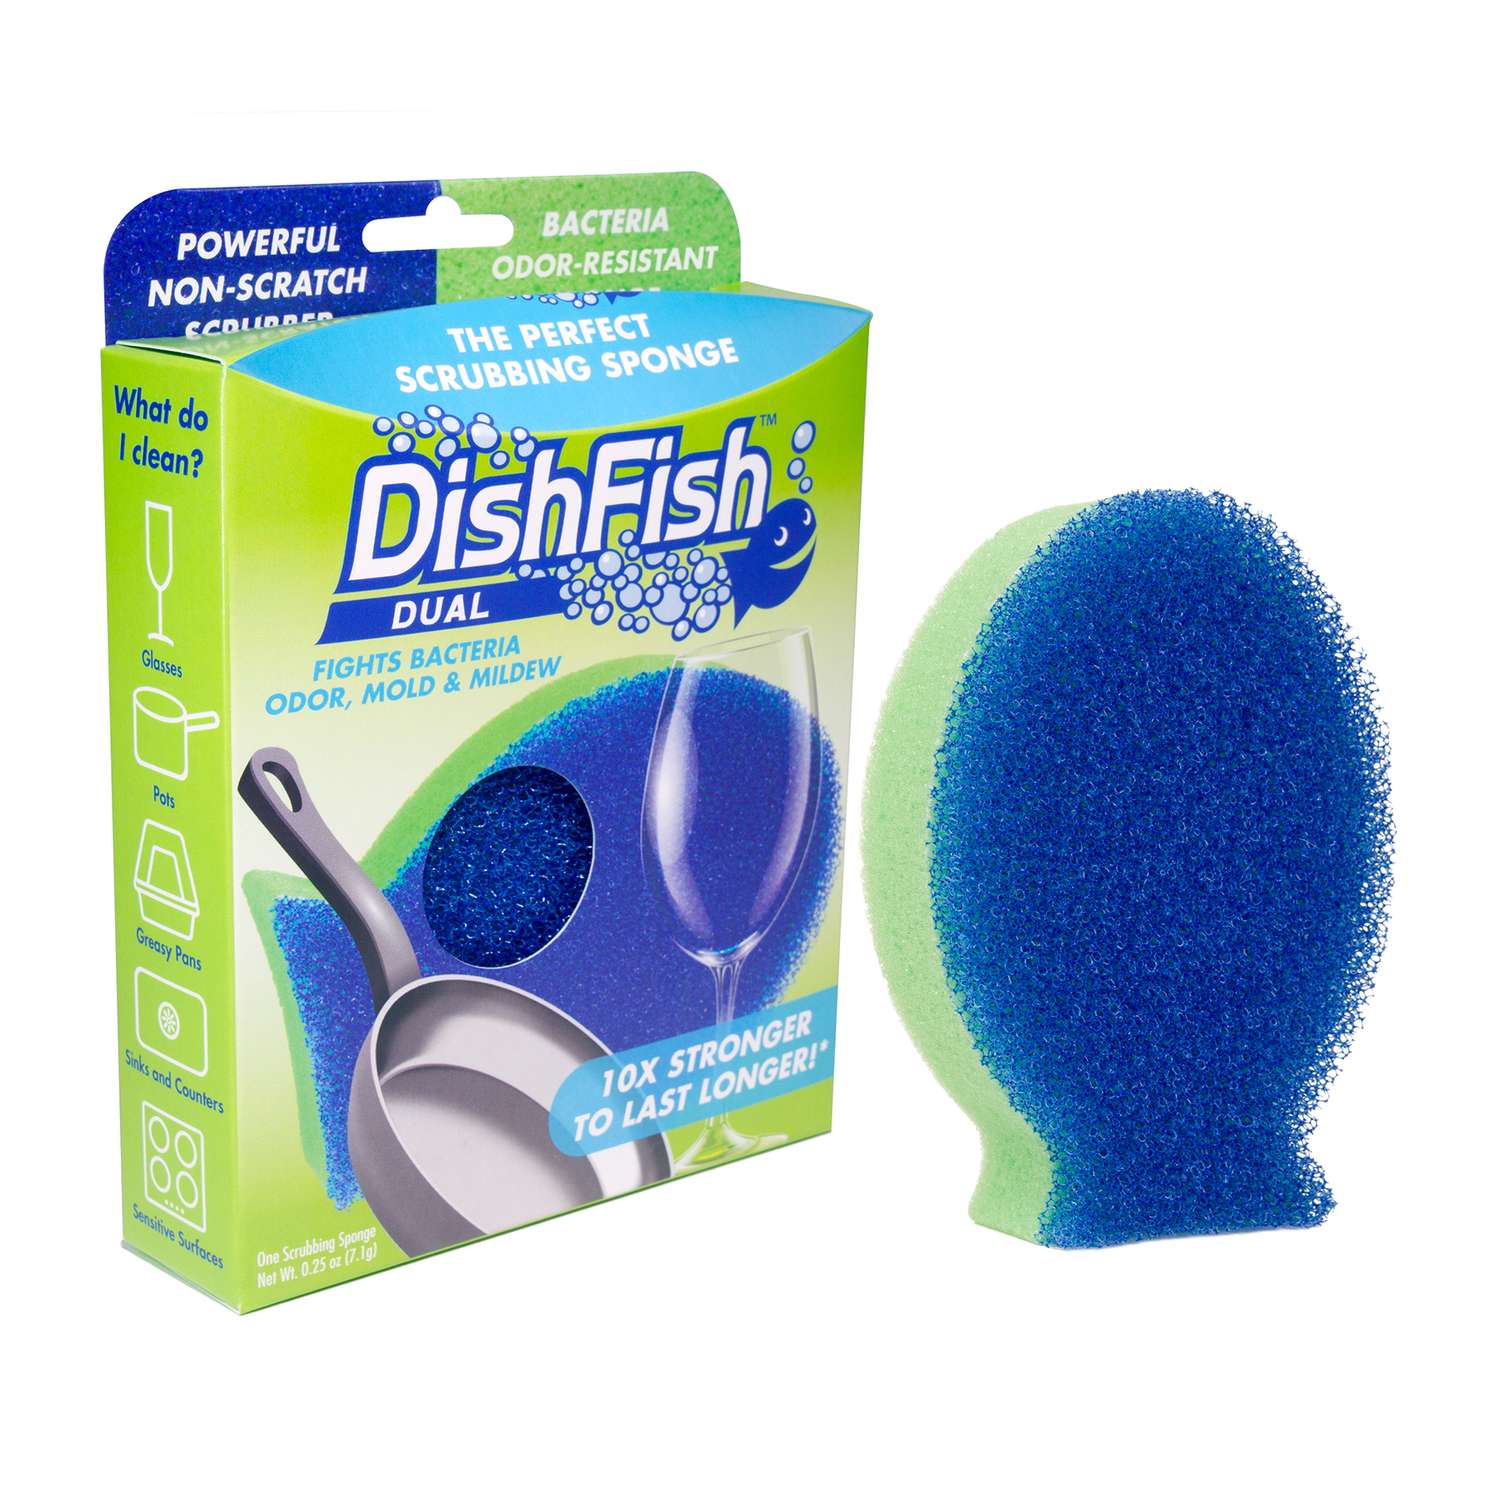 Dishwashing Wand Sponge- Kitchen Scrubber Sponge, 1 Brush with Handle and 2 Refill Replacement Heads, for Washing Bowl, Pot, and Sink